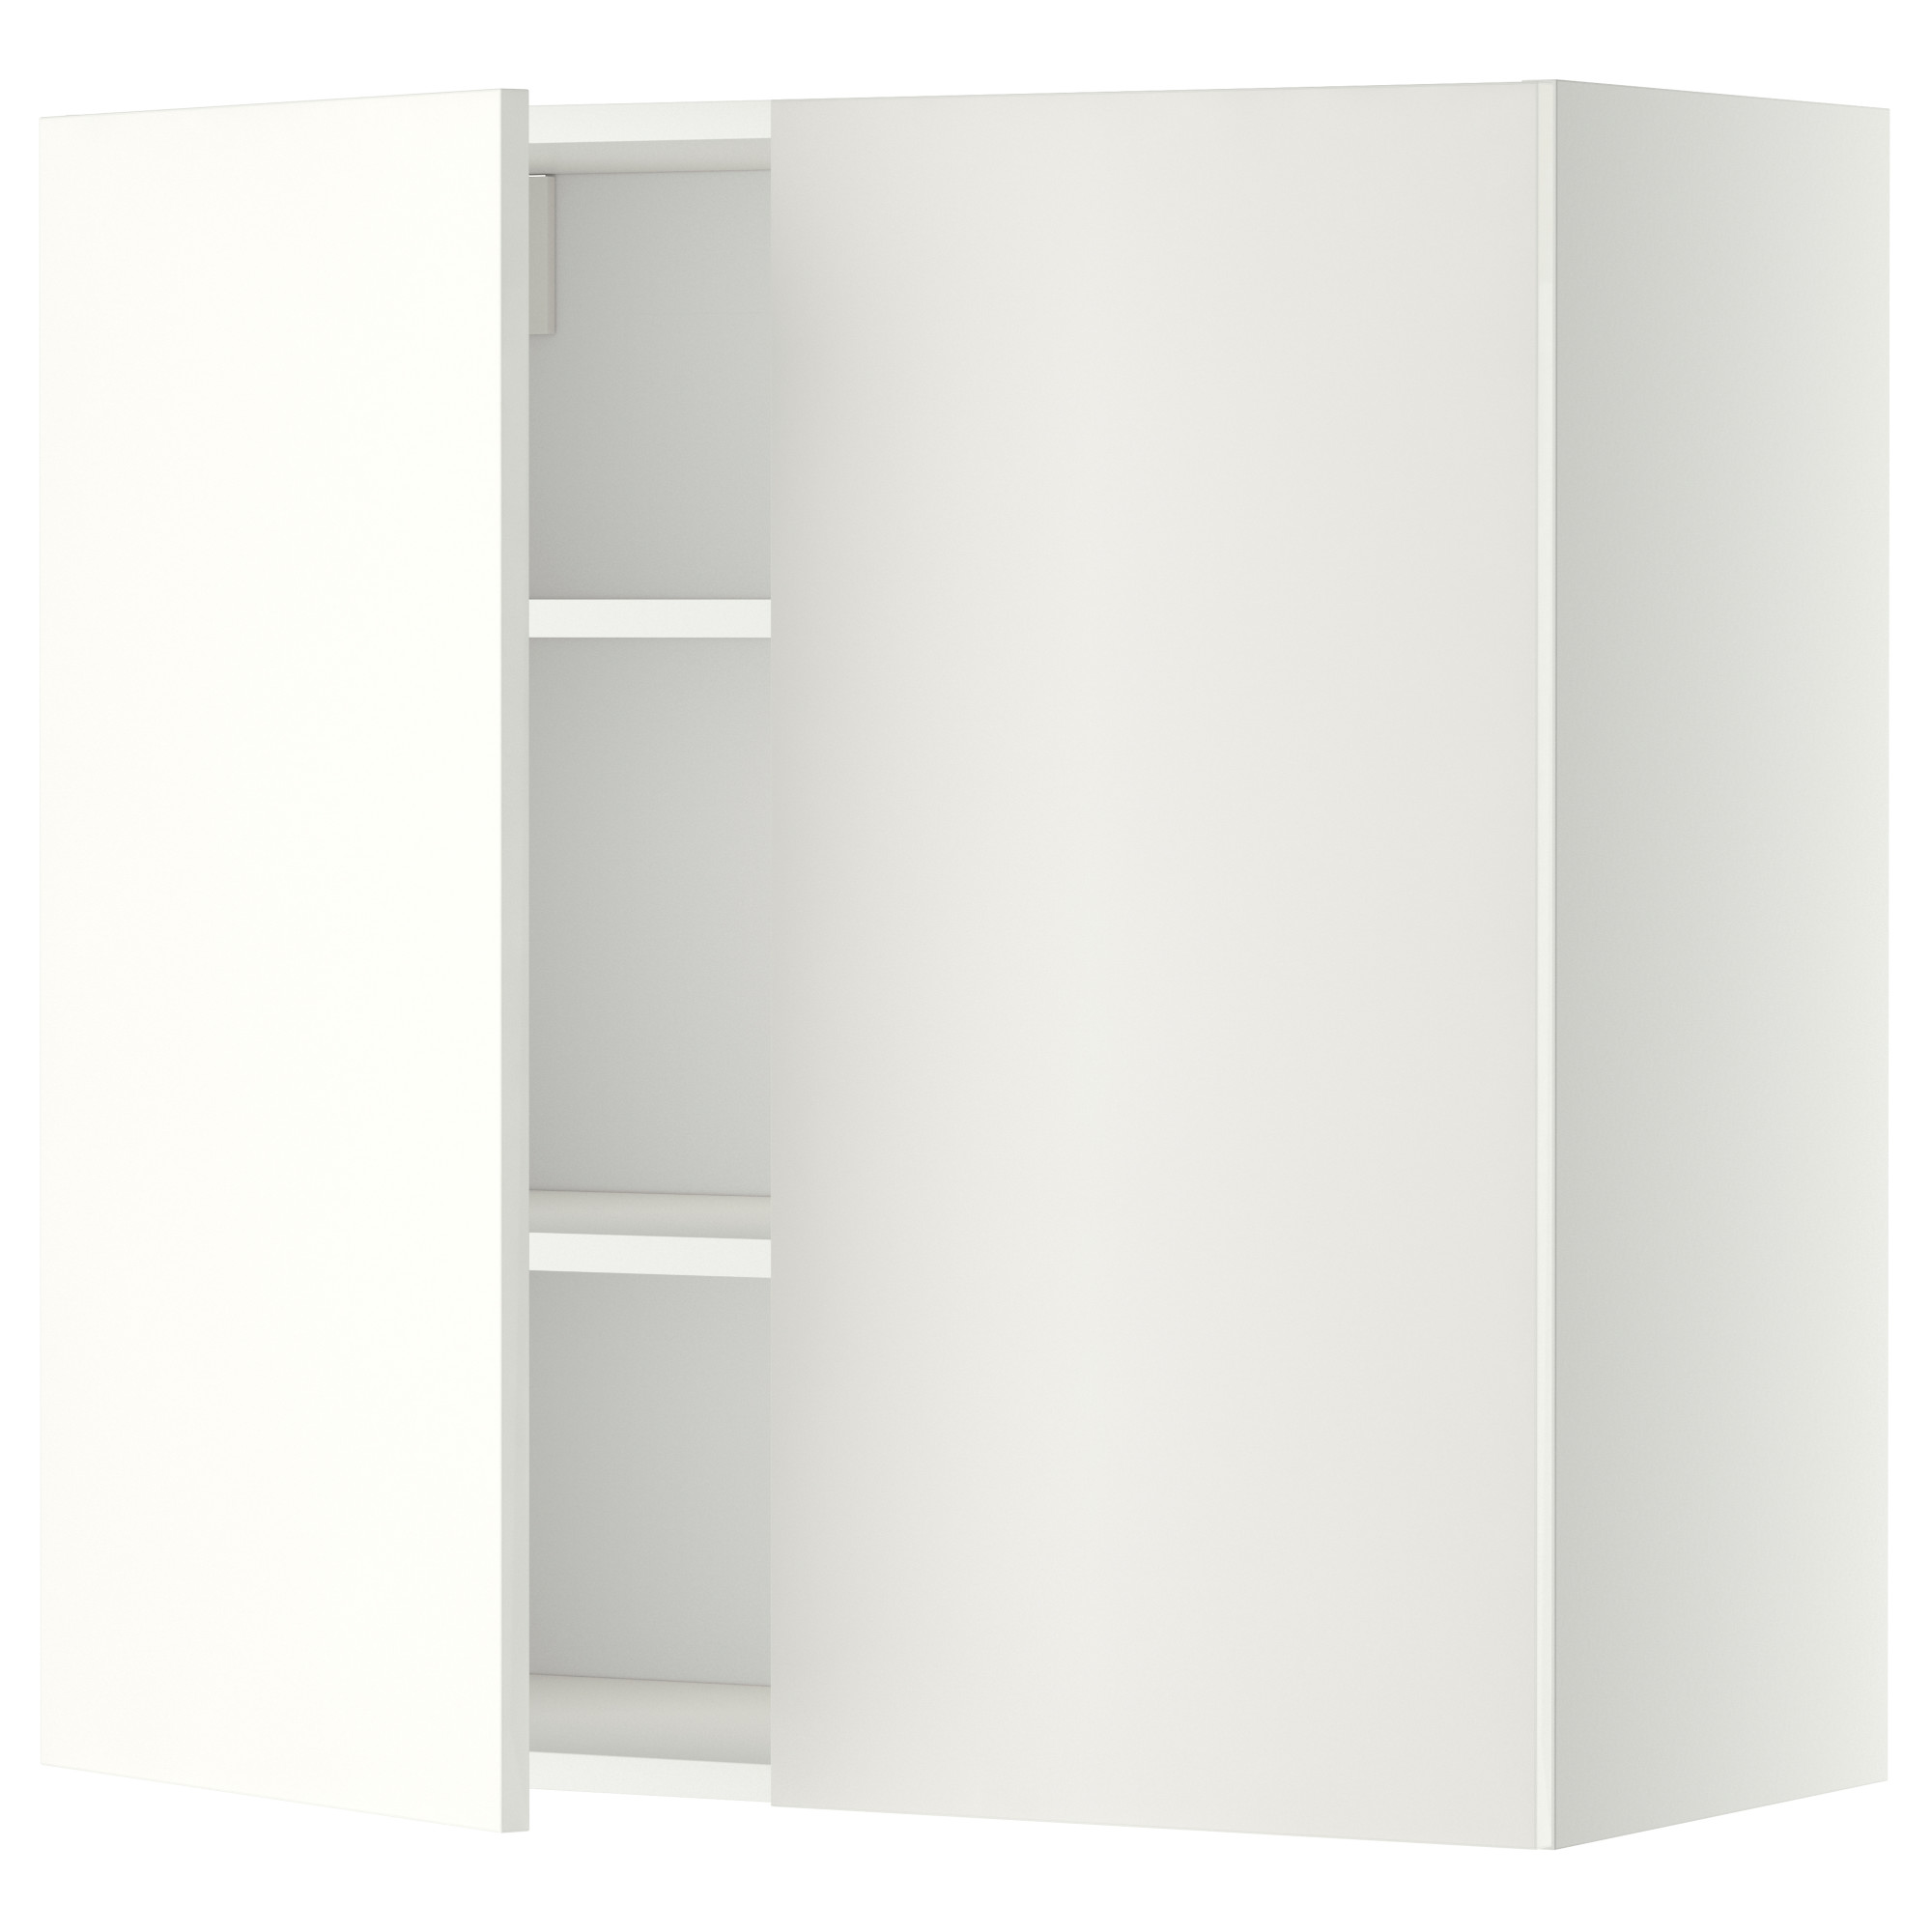 Metod Wall Cabinet With Shelves 2 Doors